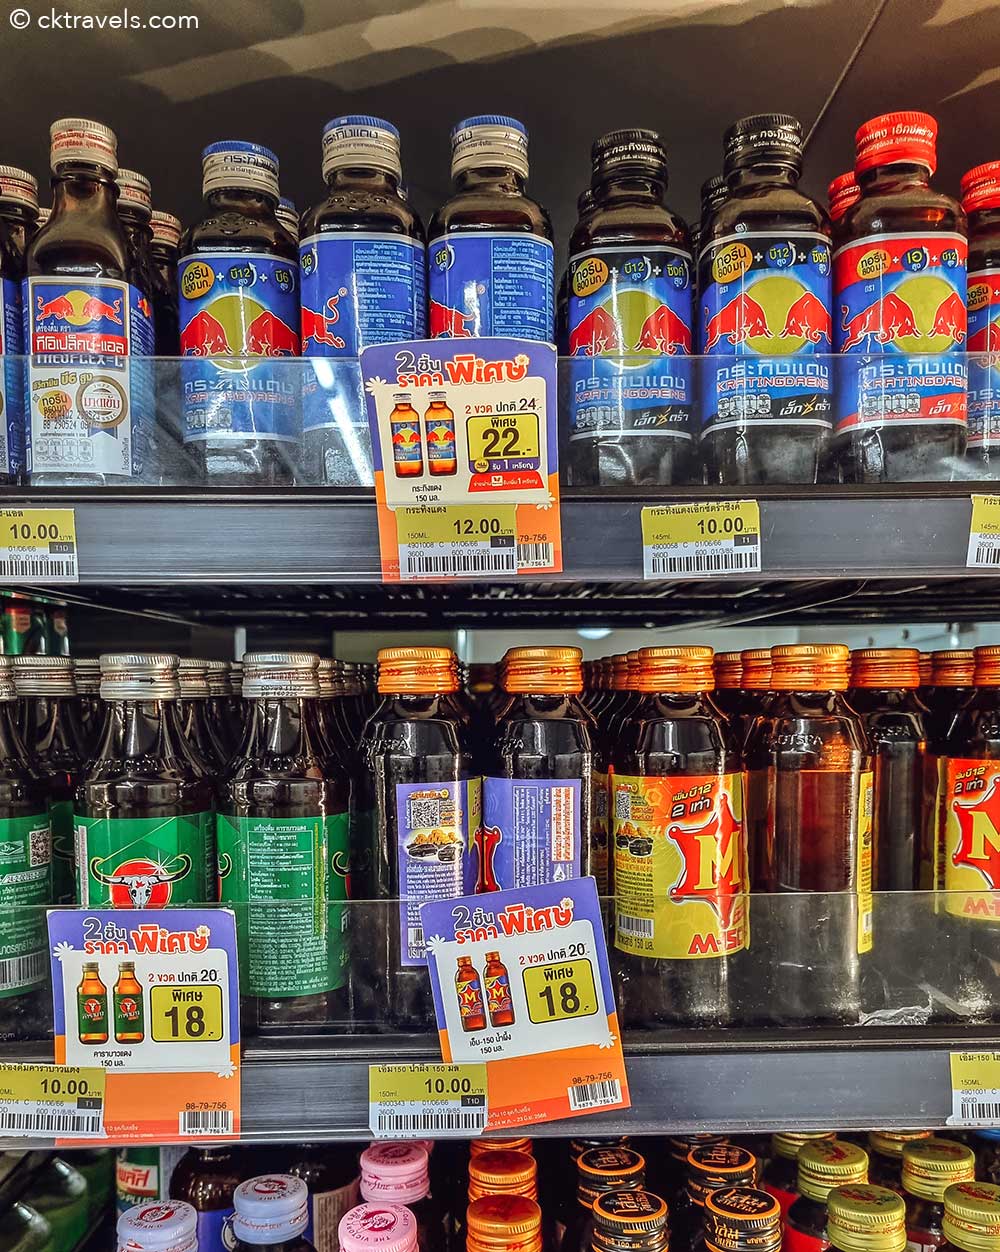 Red Bull / energy drinks Thailand 7-Eleven